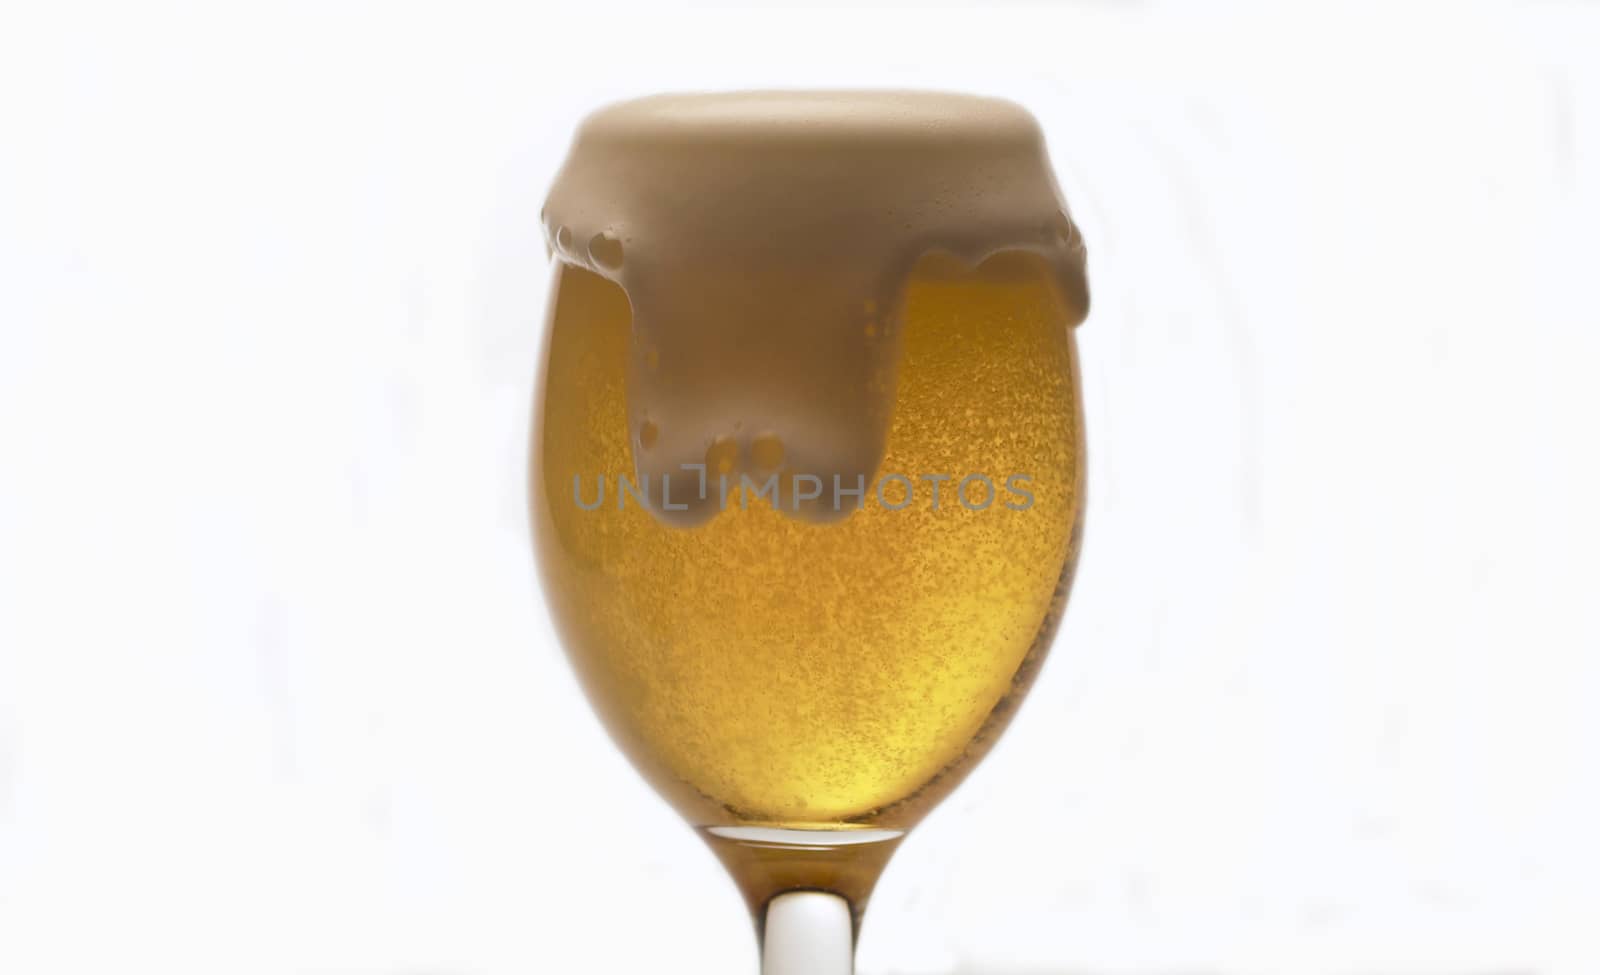 Close up of beer's foam rising in a glass, side view, white background. The foamy drink overflows and spills onto the table.